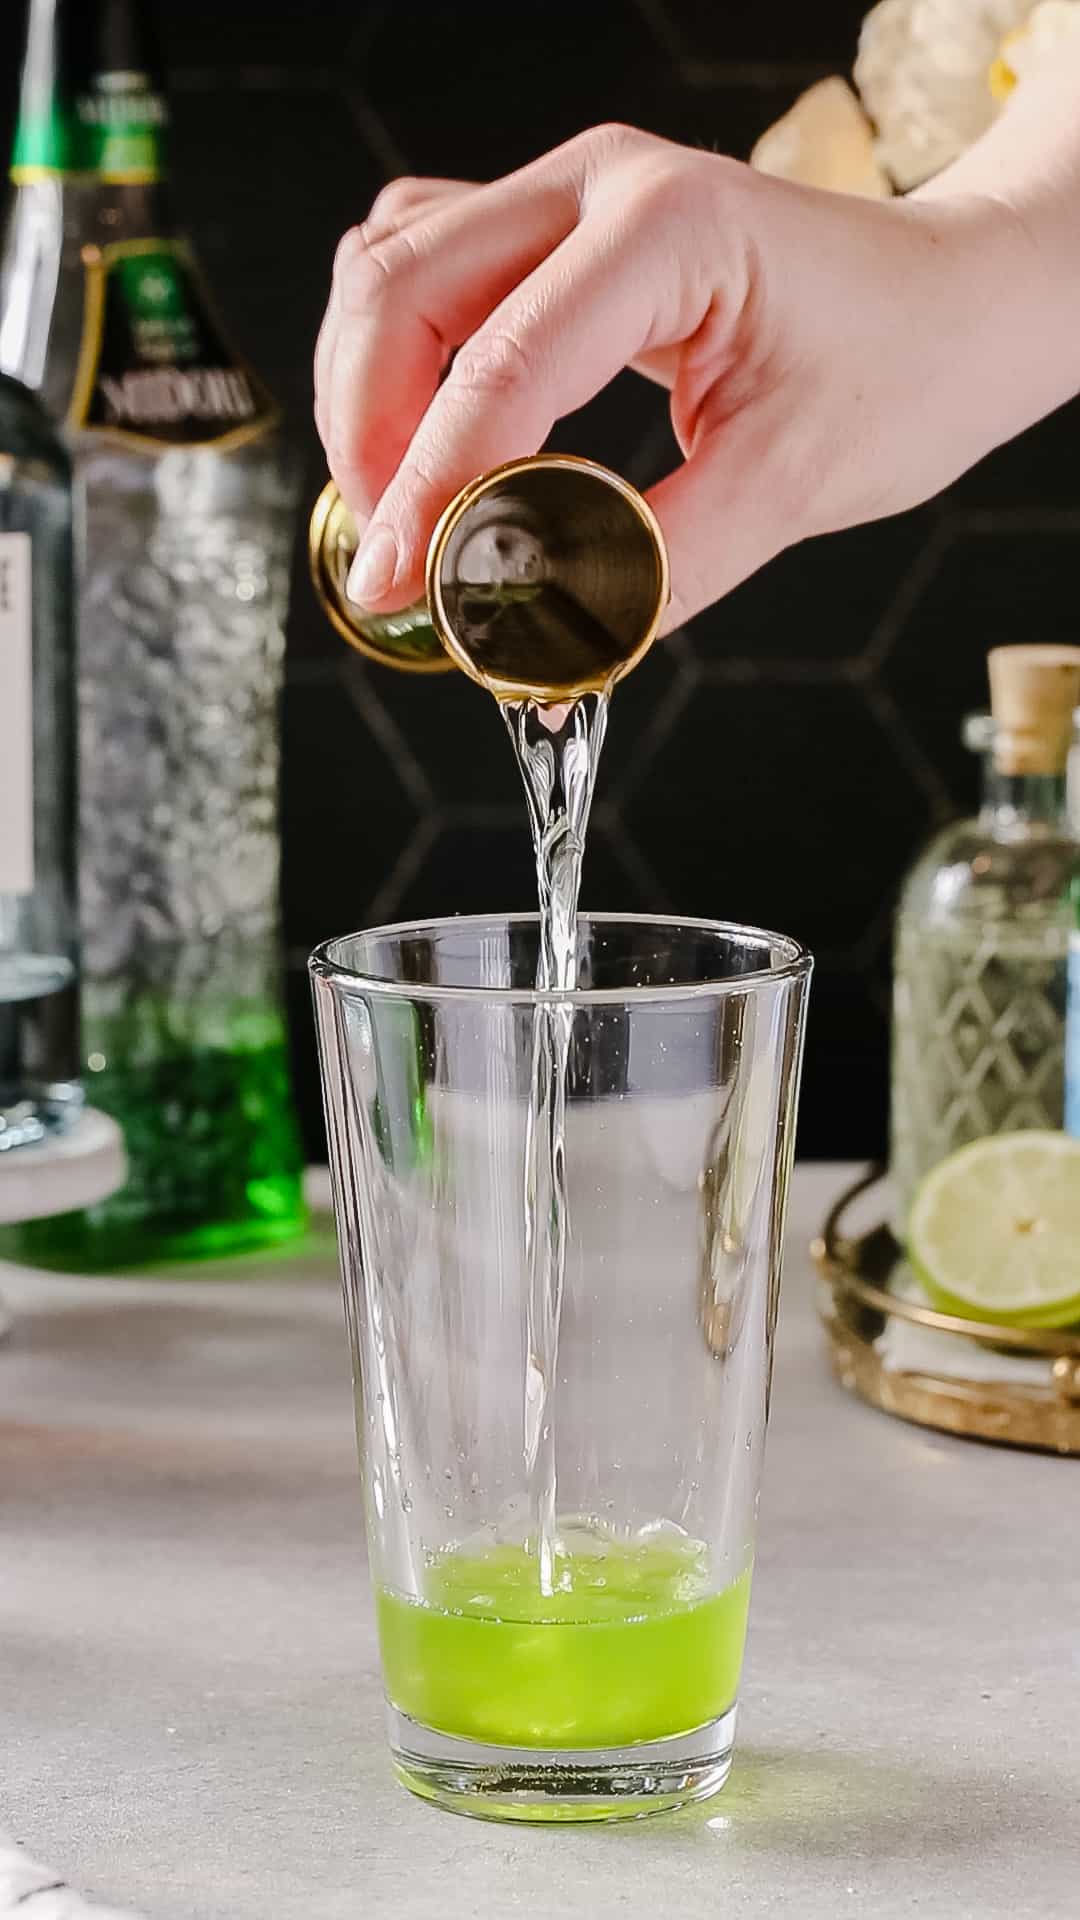 Hand pouring vodka from a jigger into a glass cocktail shaker.